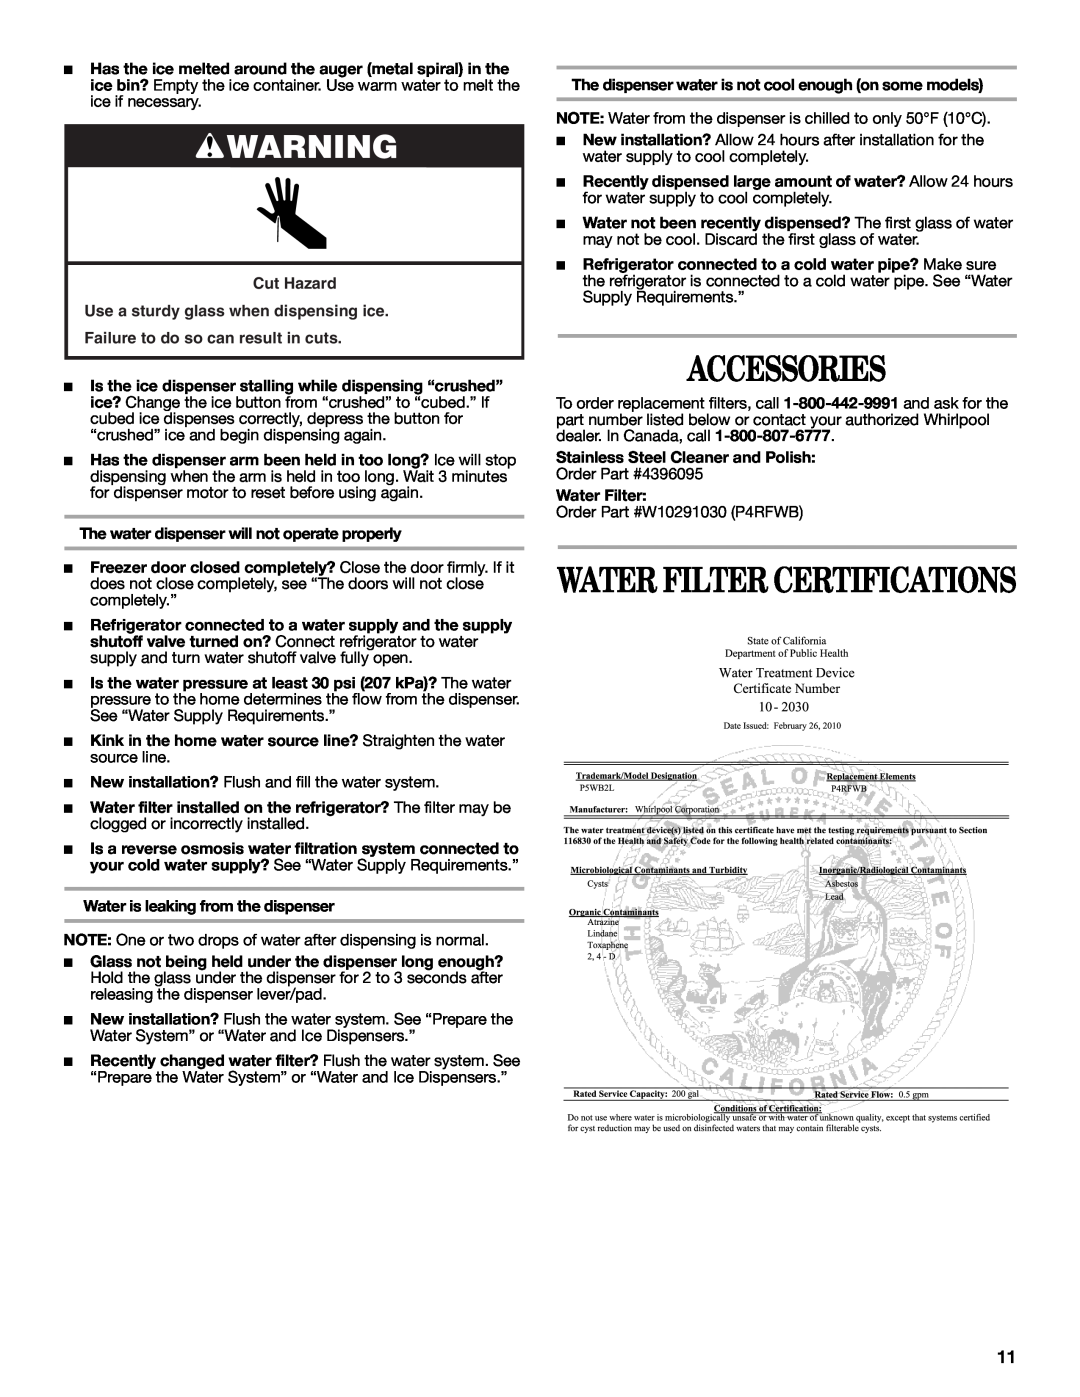 Whirlpool W10346247A Accessories, Water Filter Certifications, The water dispenser will not operate properly 